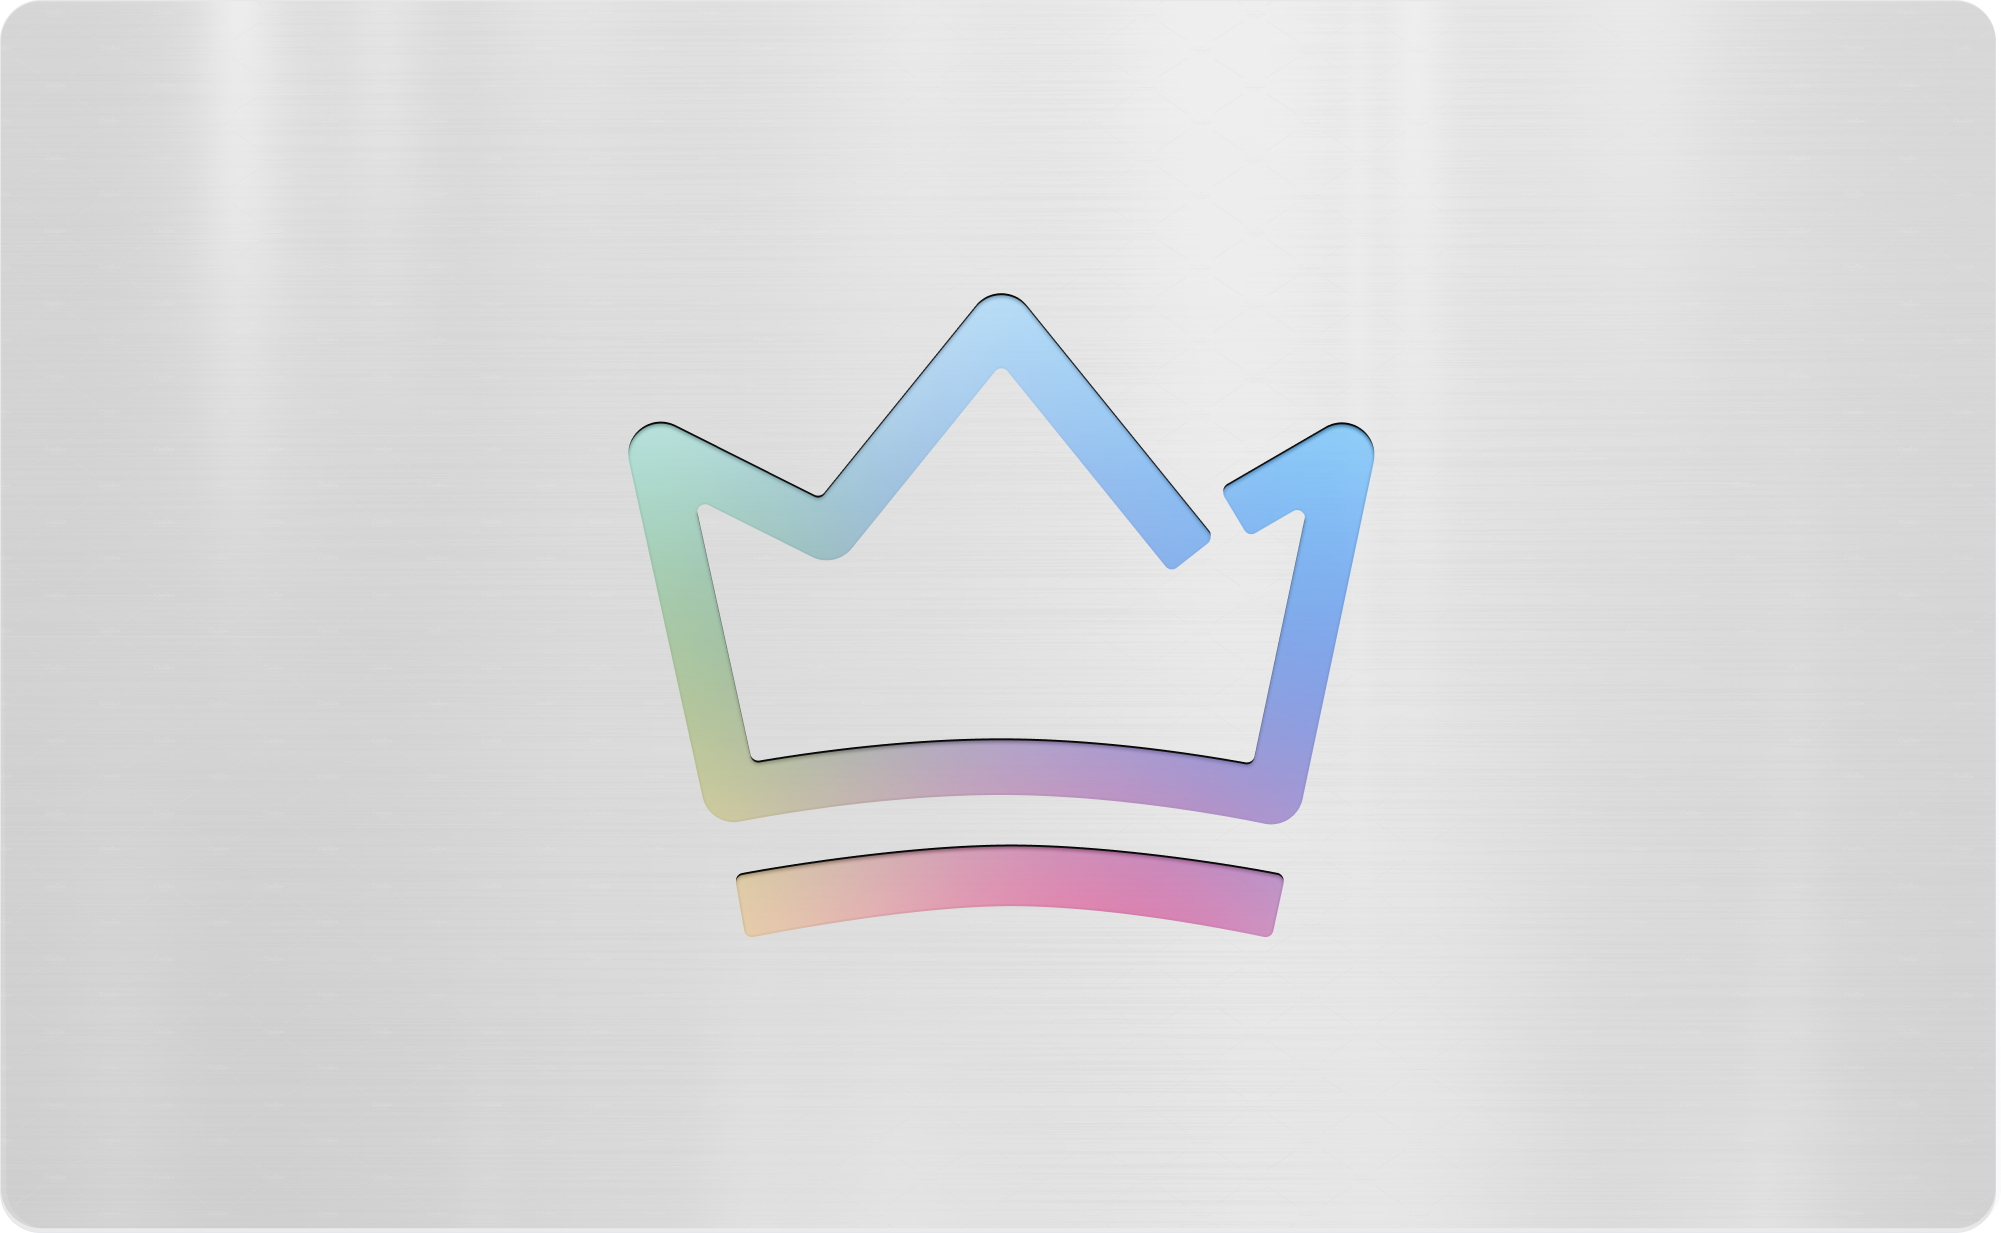 White credit card with a logo of a multi color crown in the center